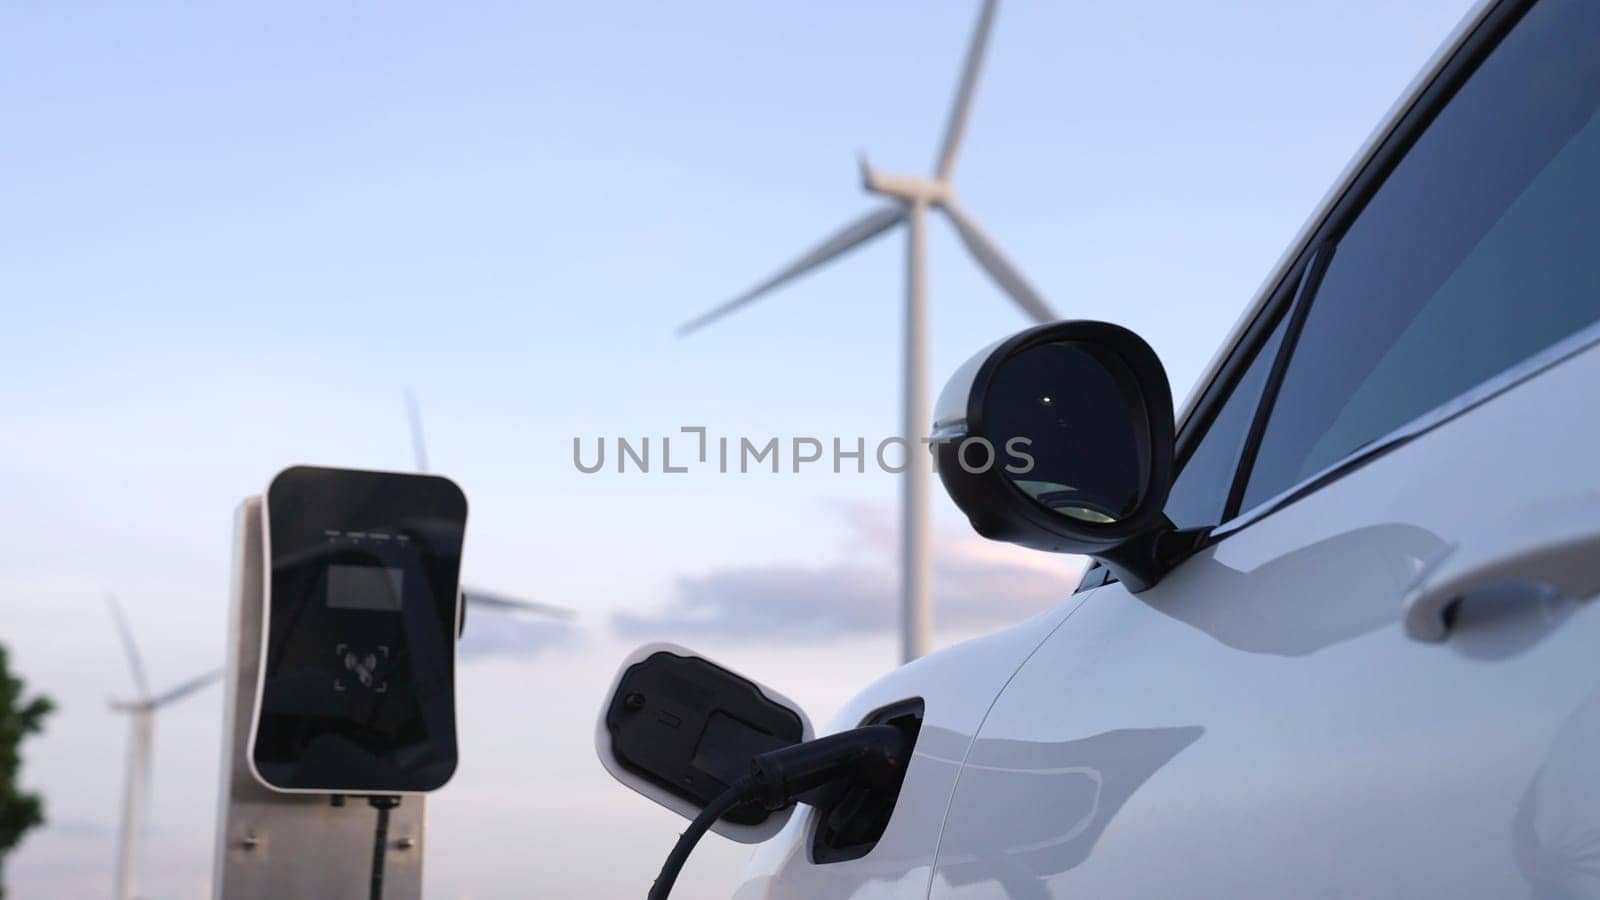 Progressive combination of EV car, charging station and wind turbine. by biancoblue